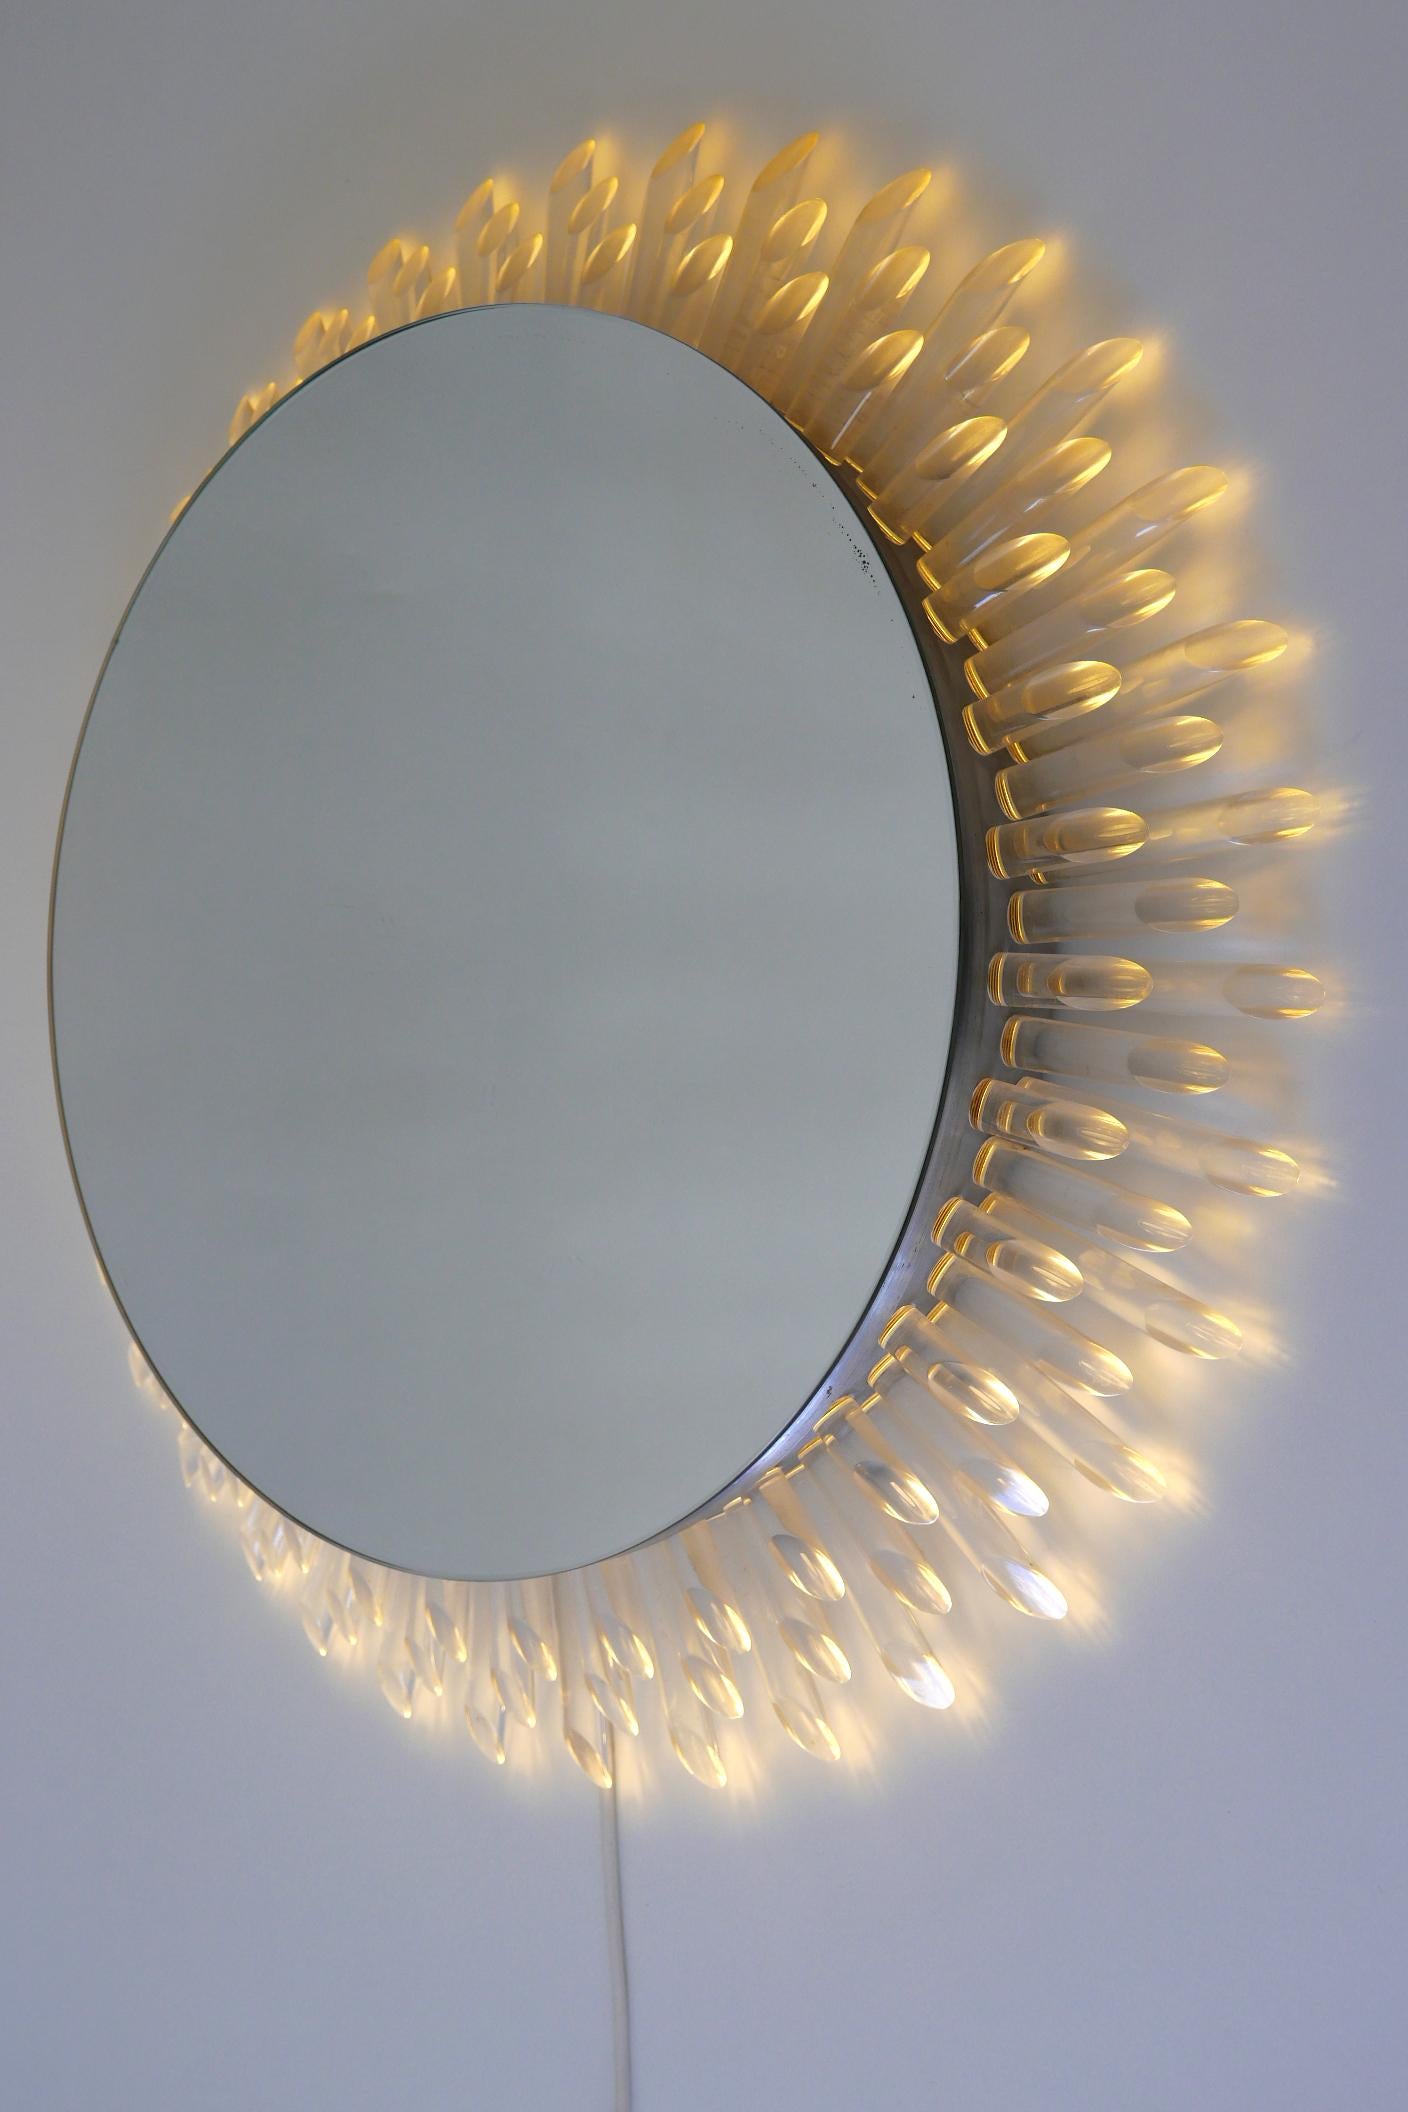 Spectacular Large Mid-Century Modern Backlit Sunburst Wall Mirror Germany 1970s For Sale 9